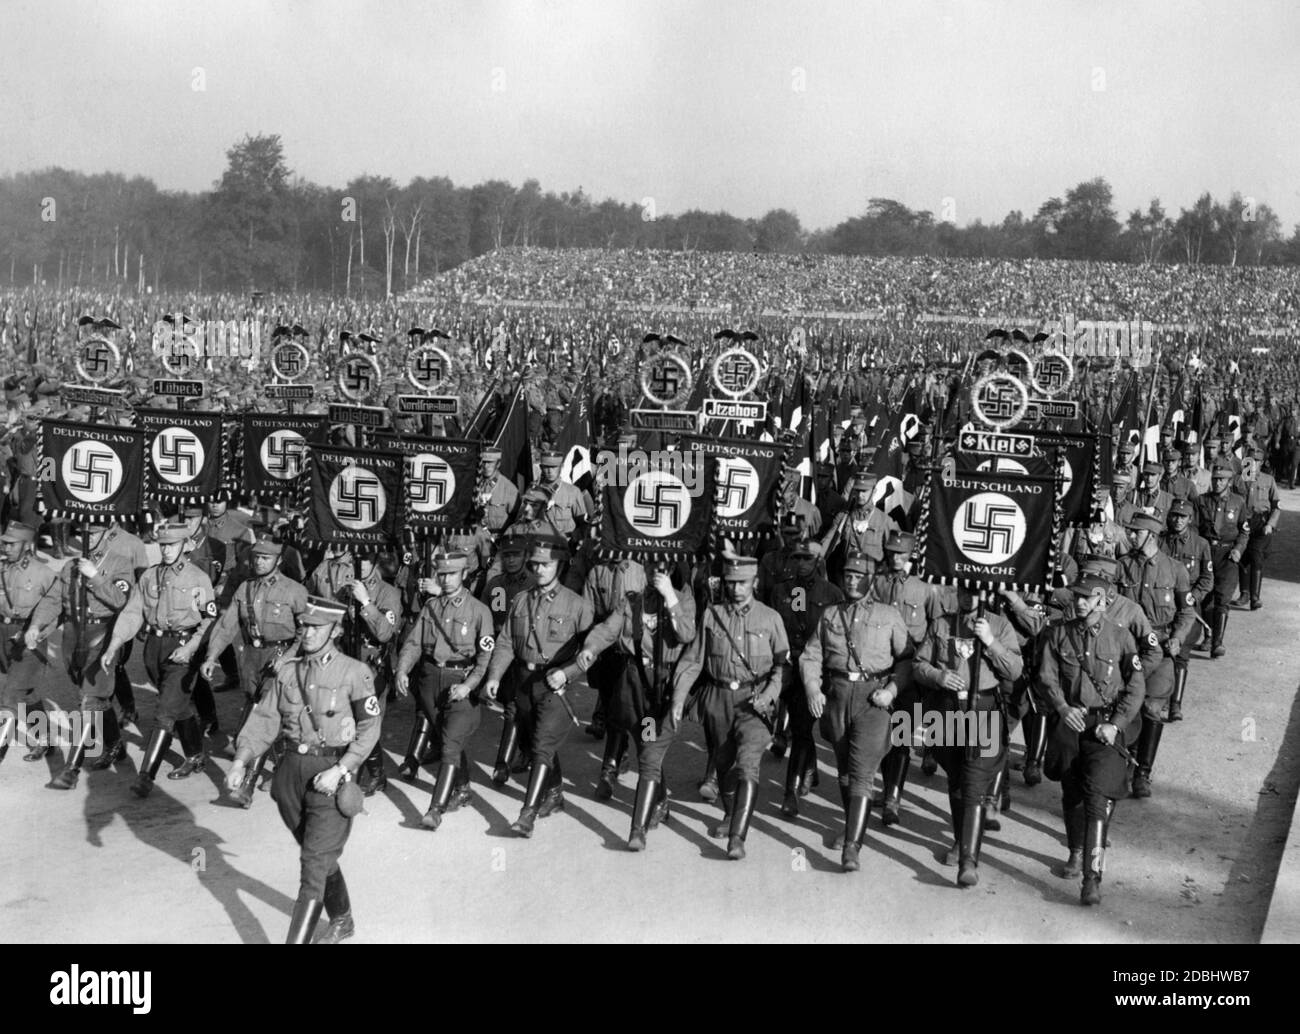 The SA troops march in step to the parade in the Luipoldarena in Nuremberg. Legible standards in the picture from left to right: Schleswig, Luebeck, Altona, Holstein, Nordfriesland, Nordmark, Itzehoe and Kiel. Stock Photo